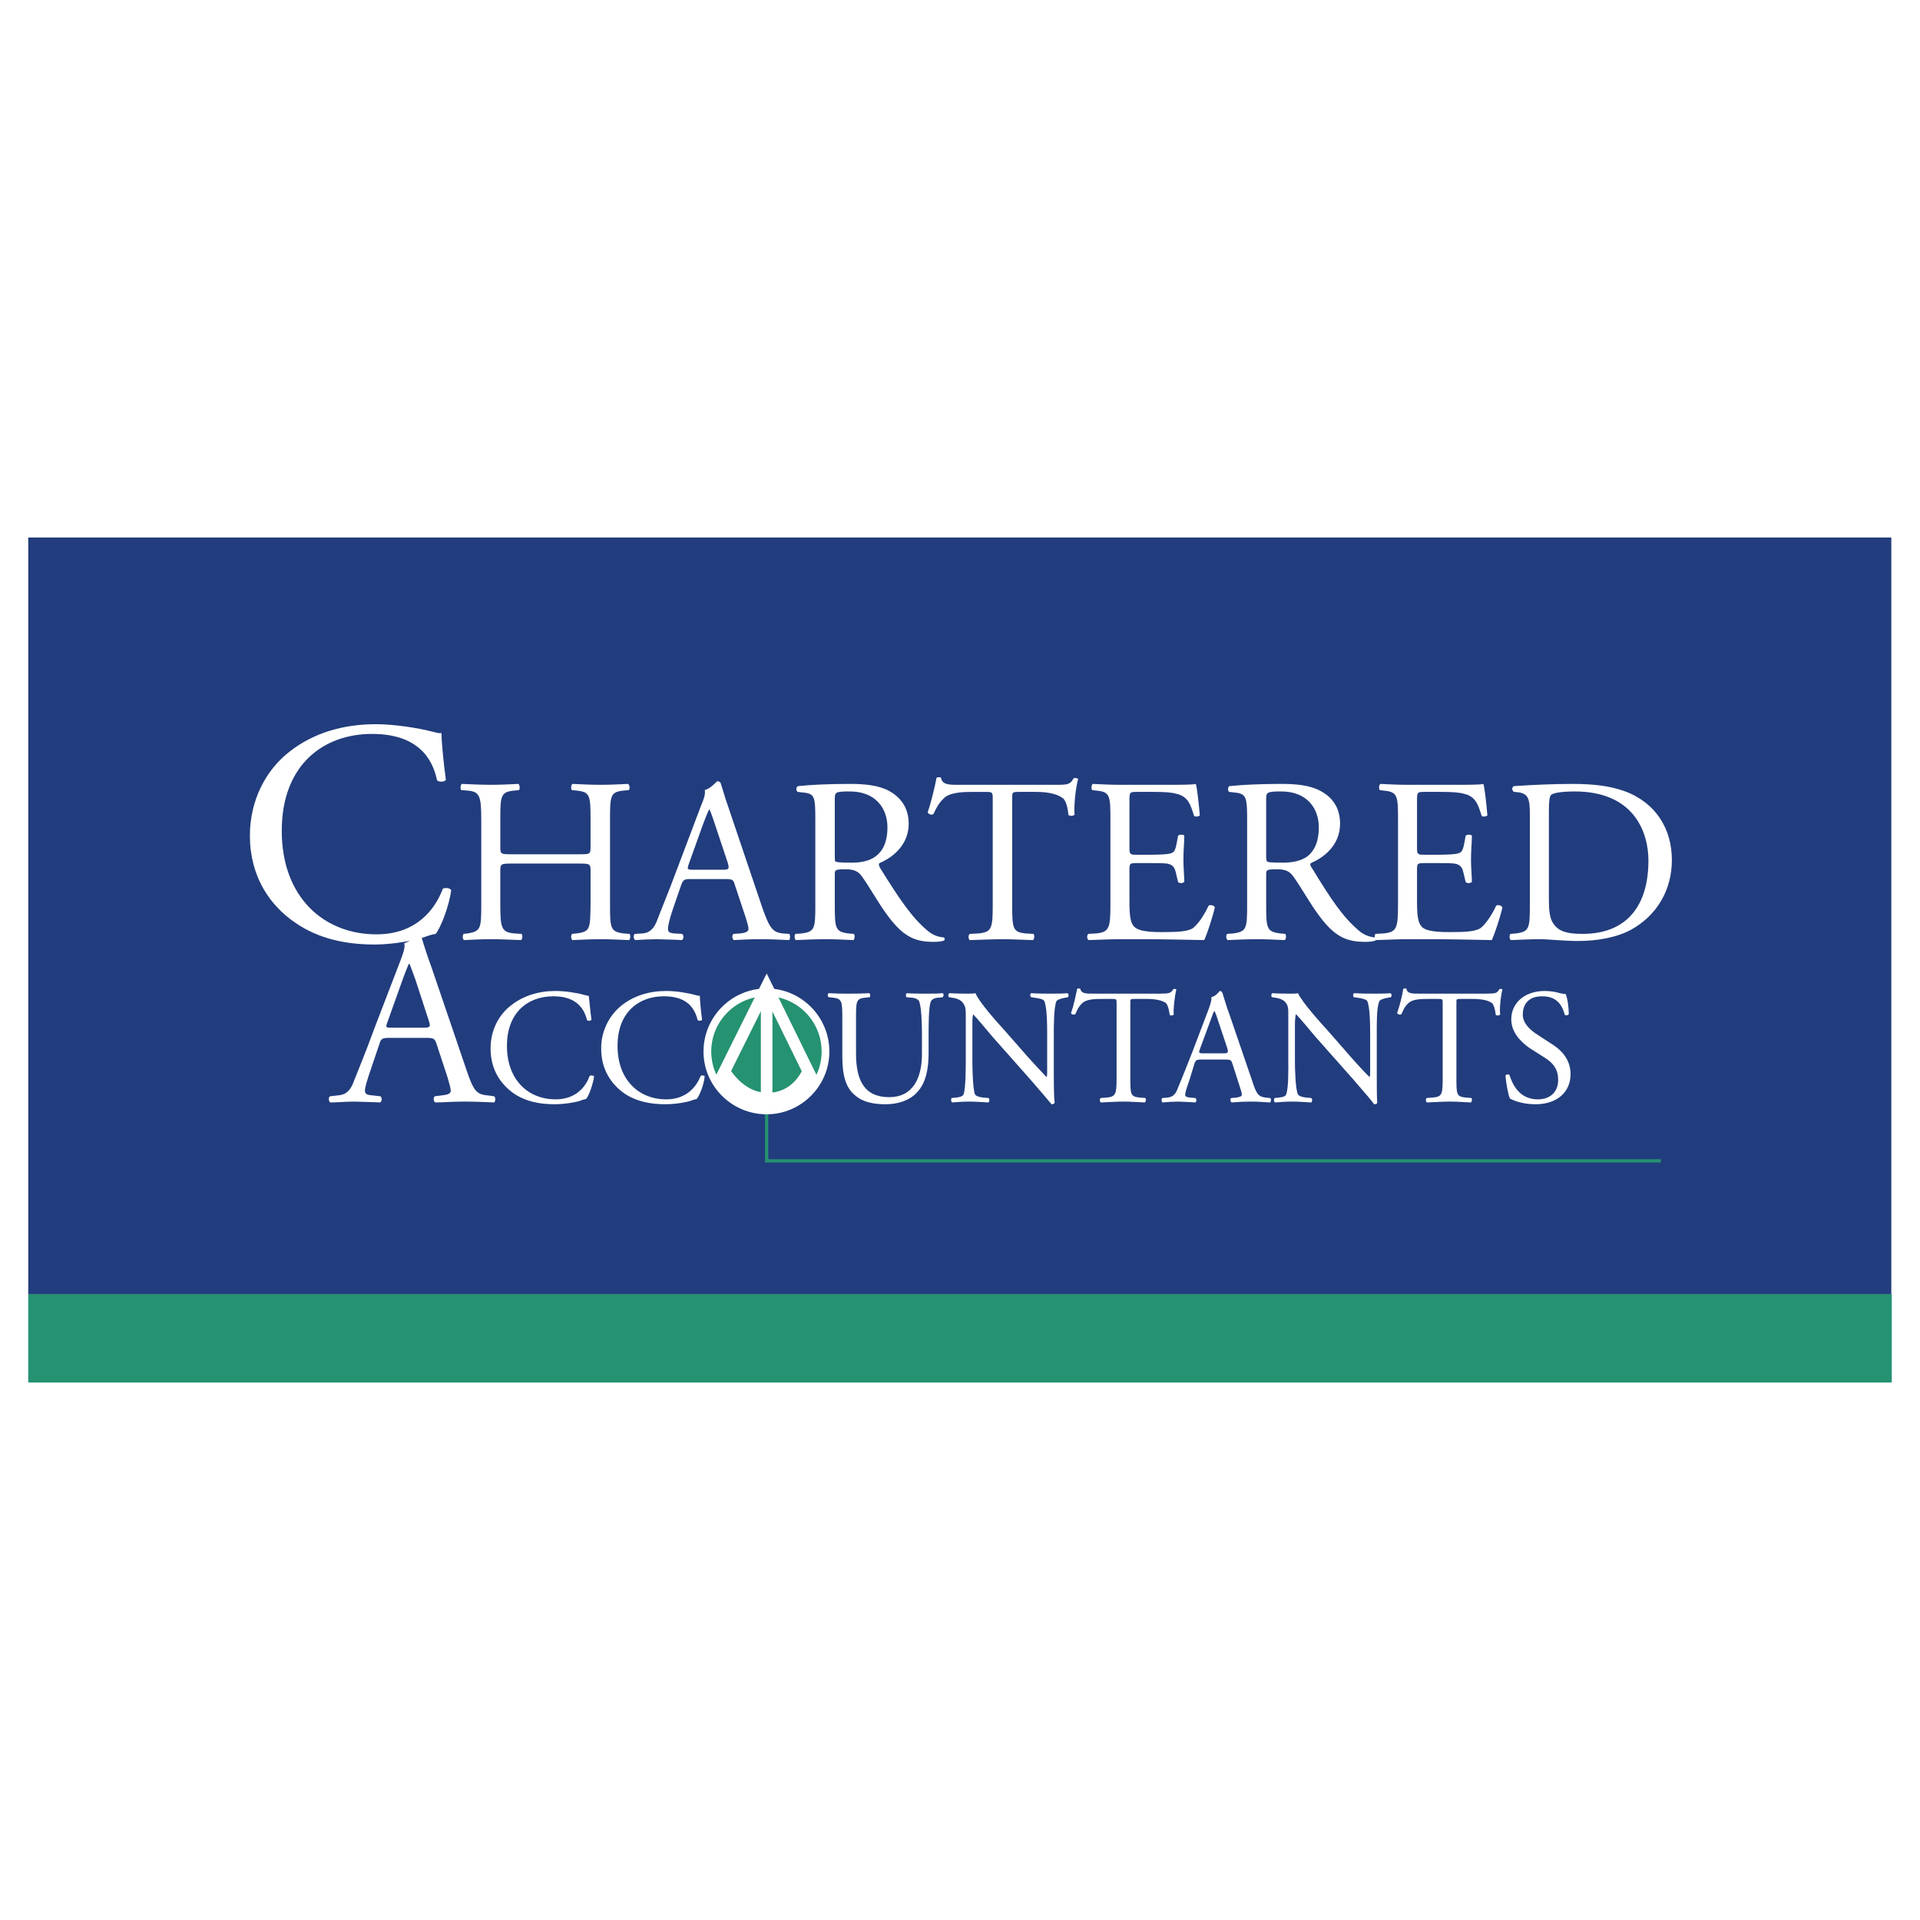 Chartered Accountant Banner-Baggrund: 